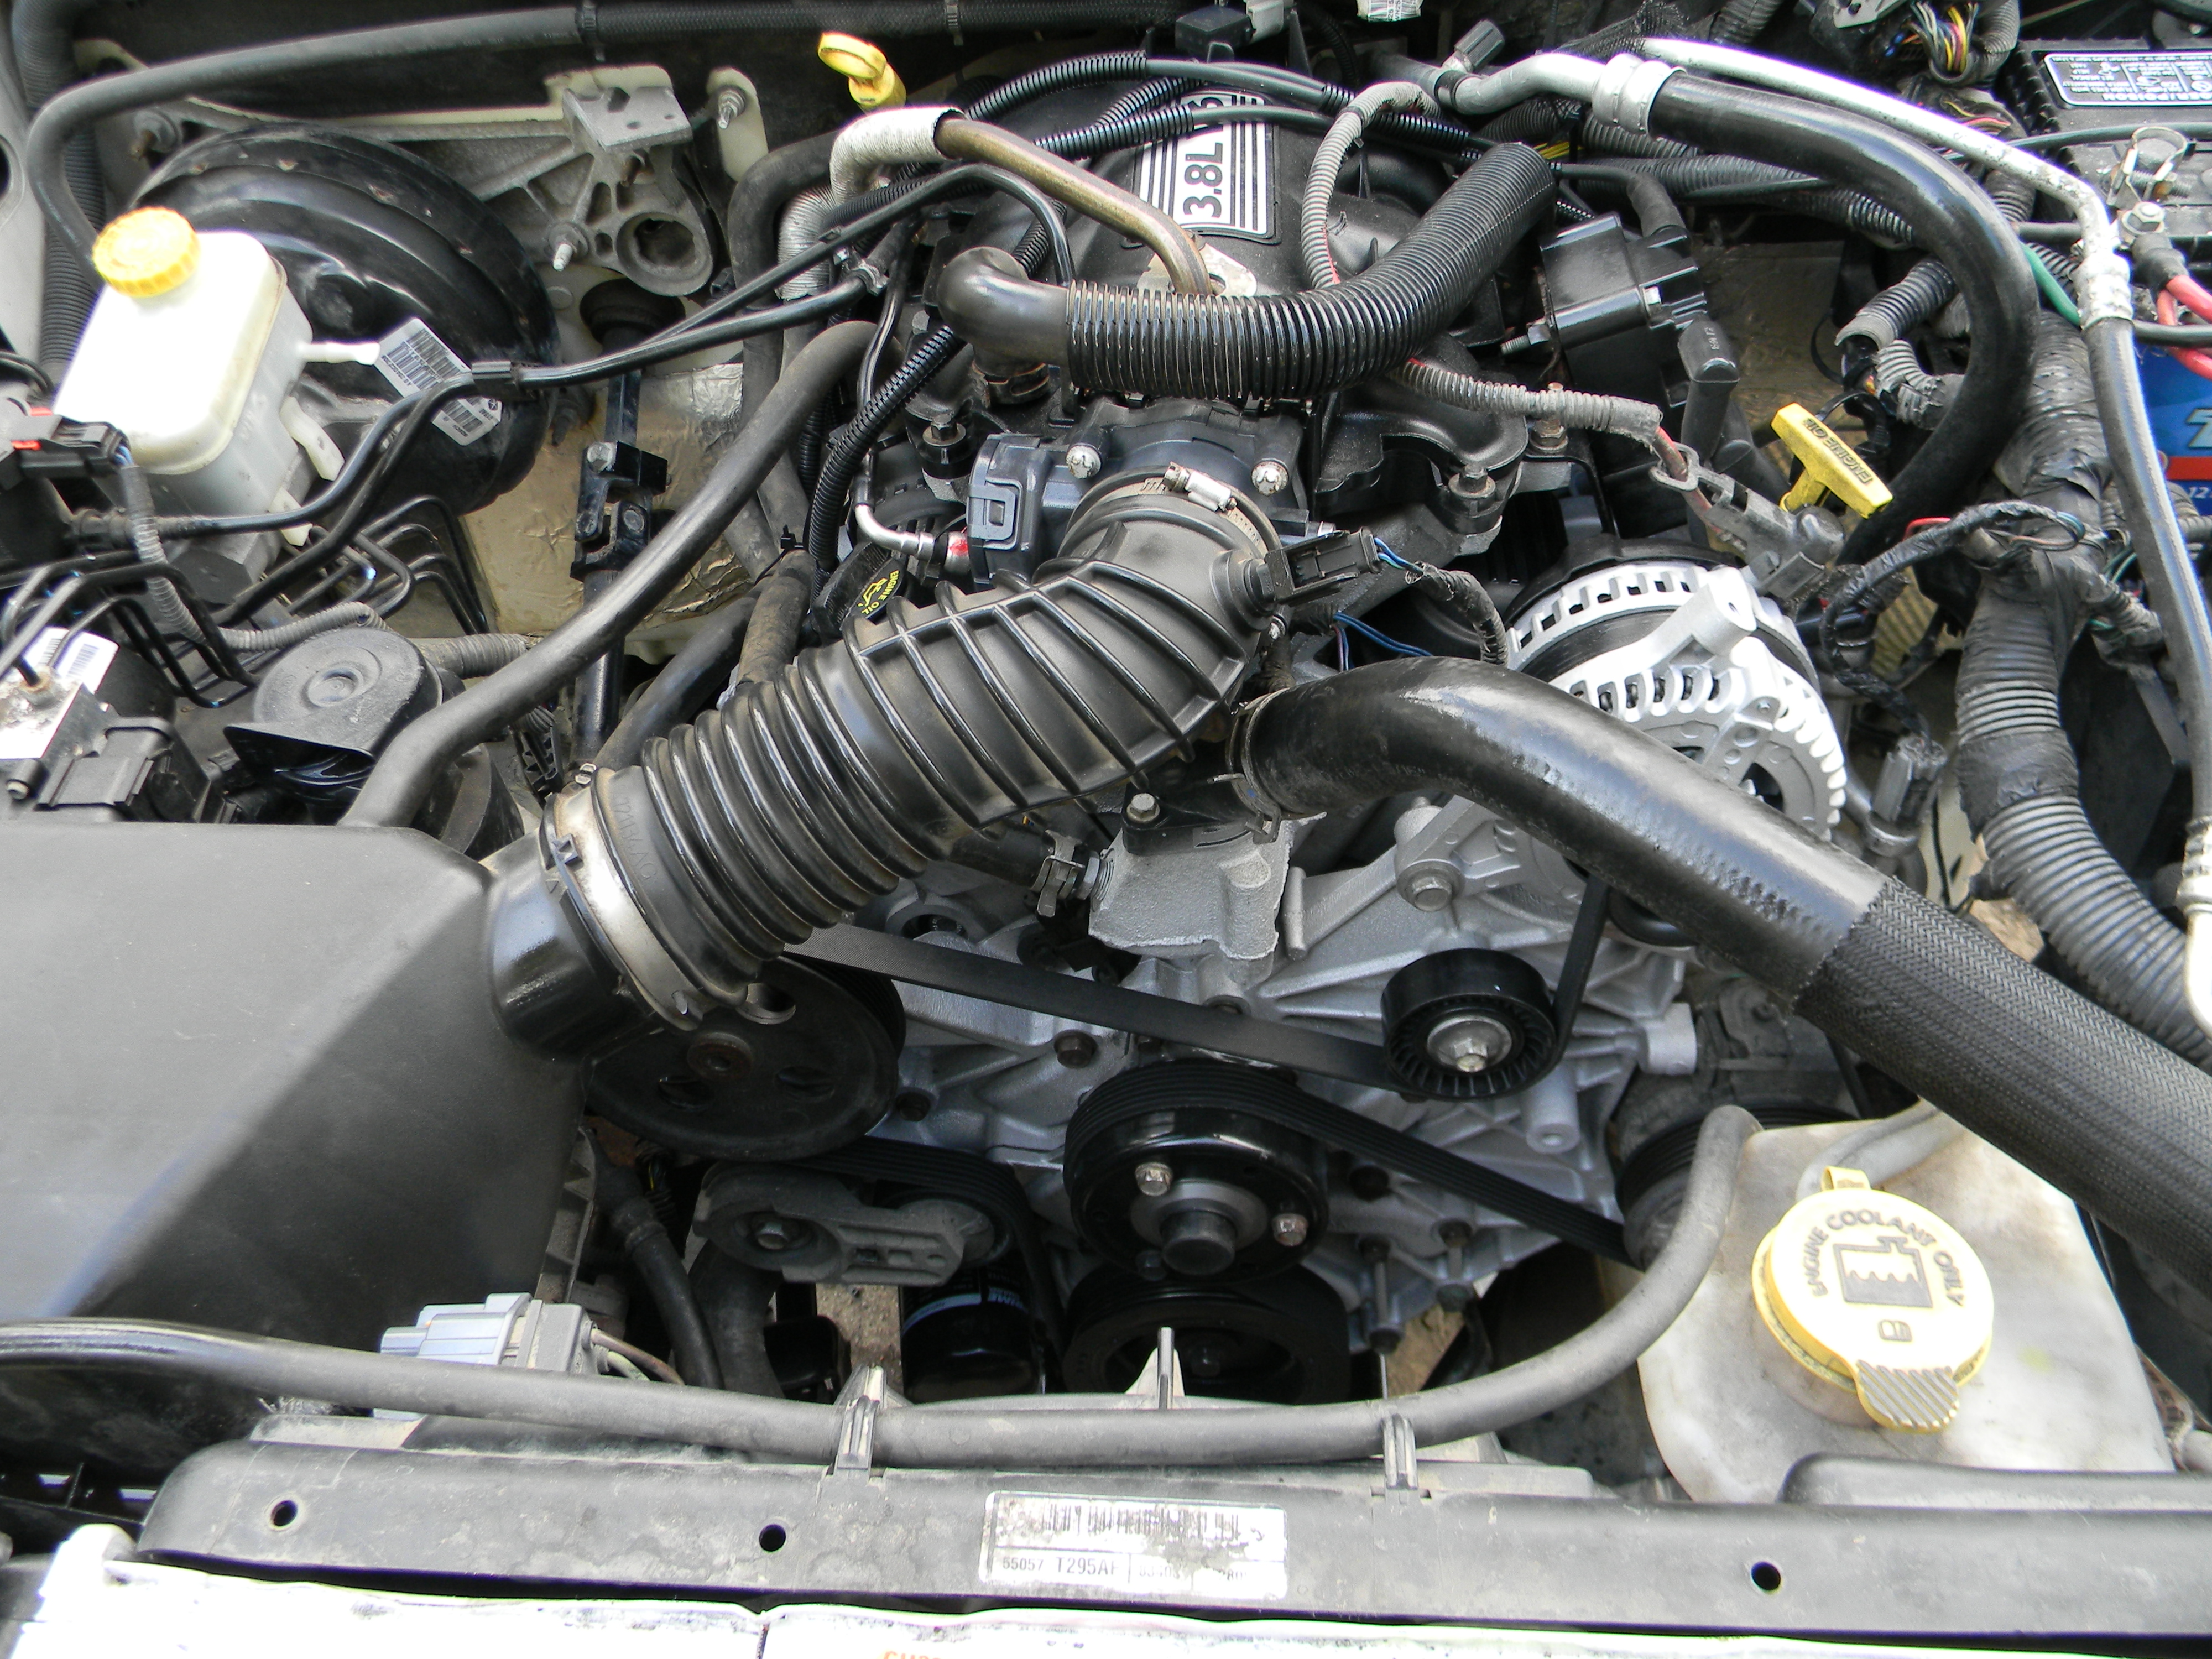 JEEP JK  Engine swap using Caravan motor. DIY with Pics - Page 7   - The top destination for Jeep JK and JL Wrangler news, rumors, and  discussion